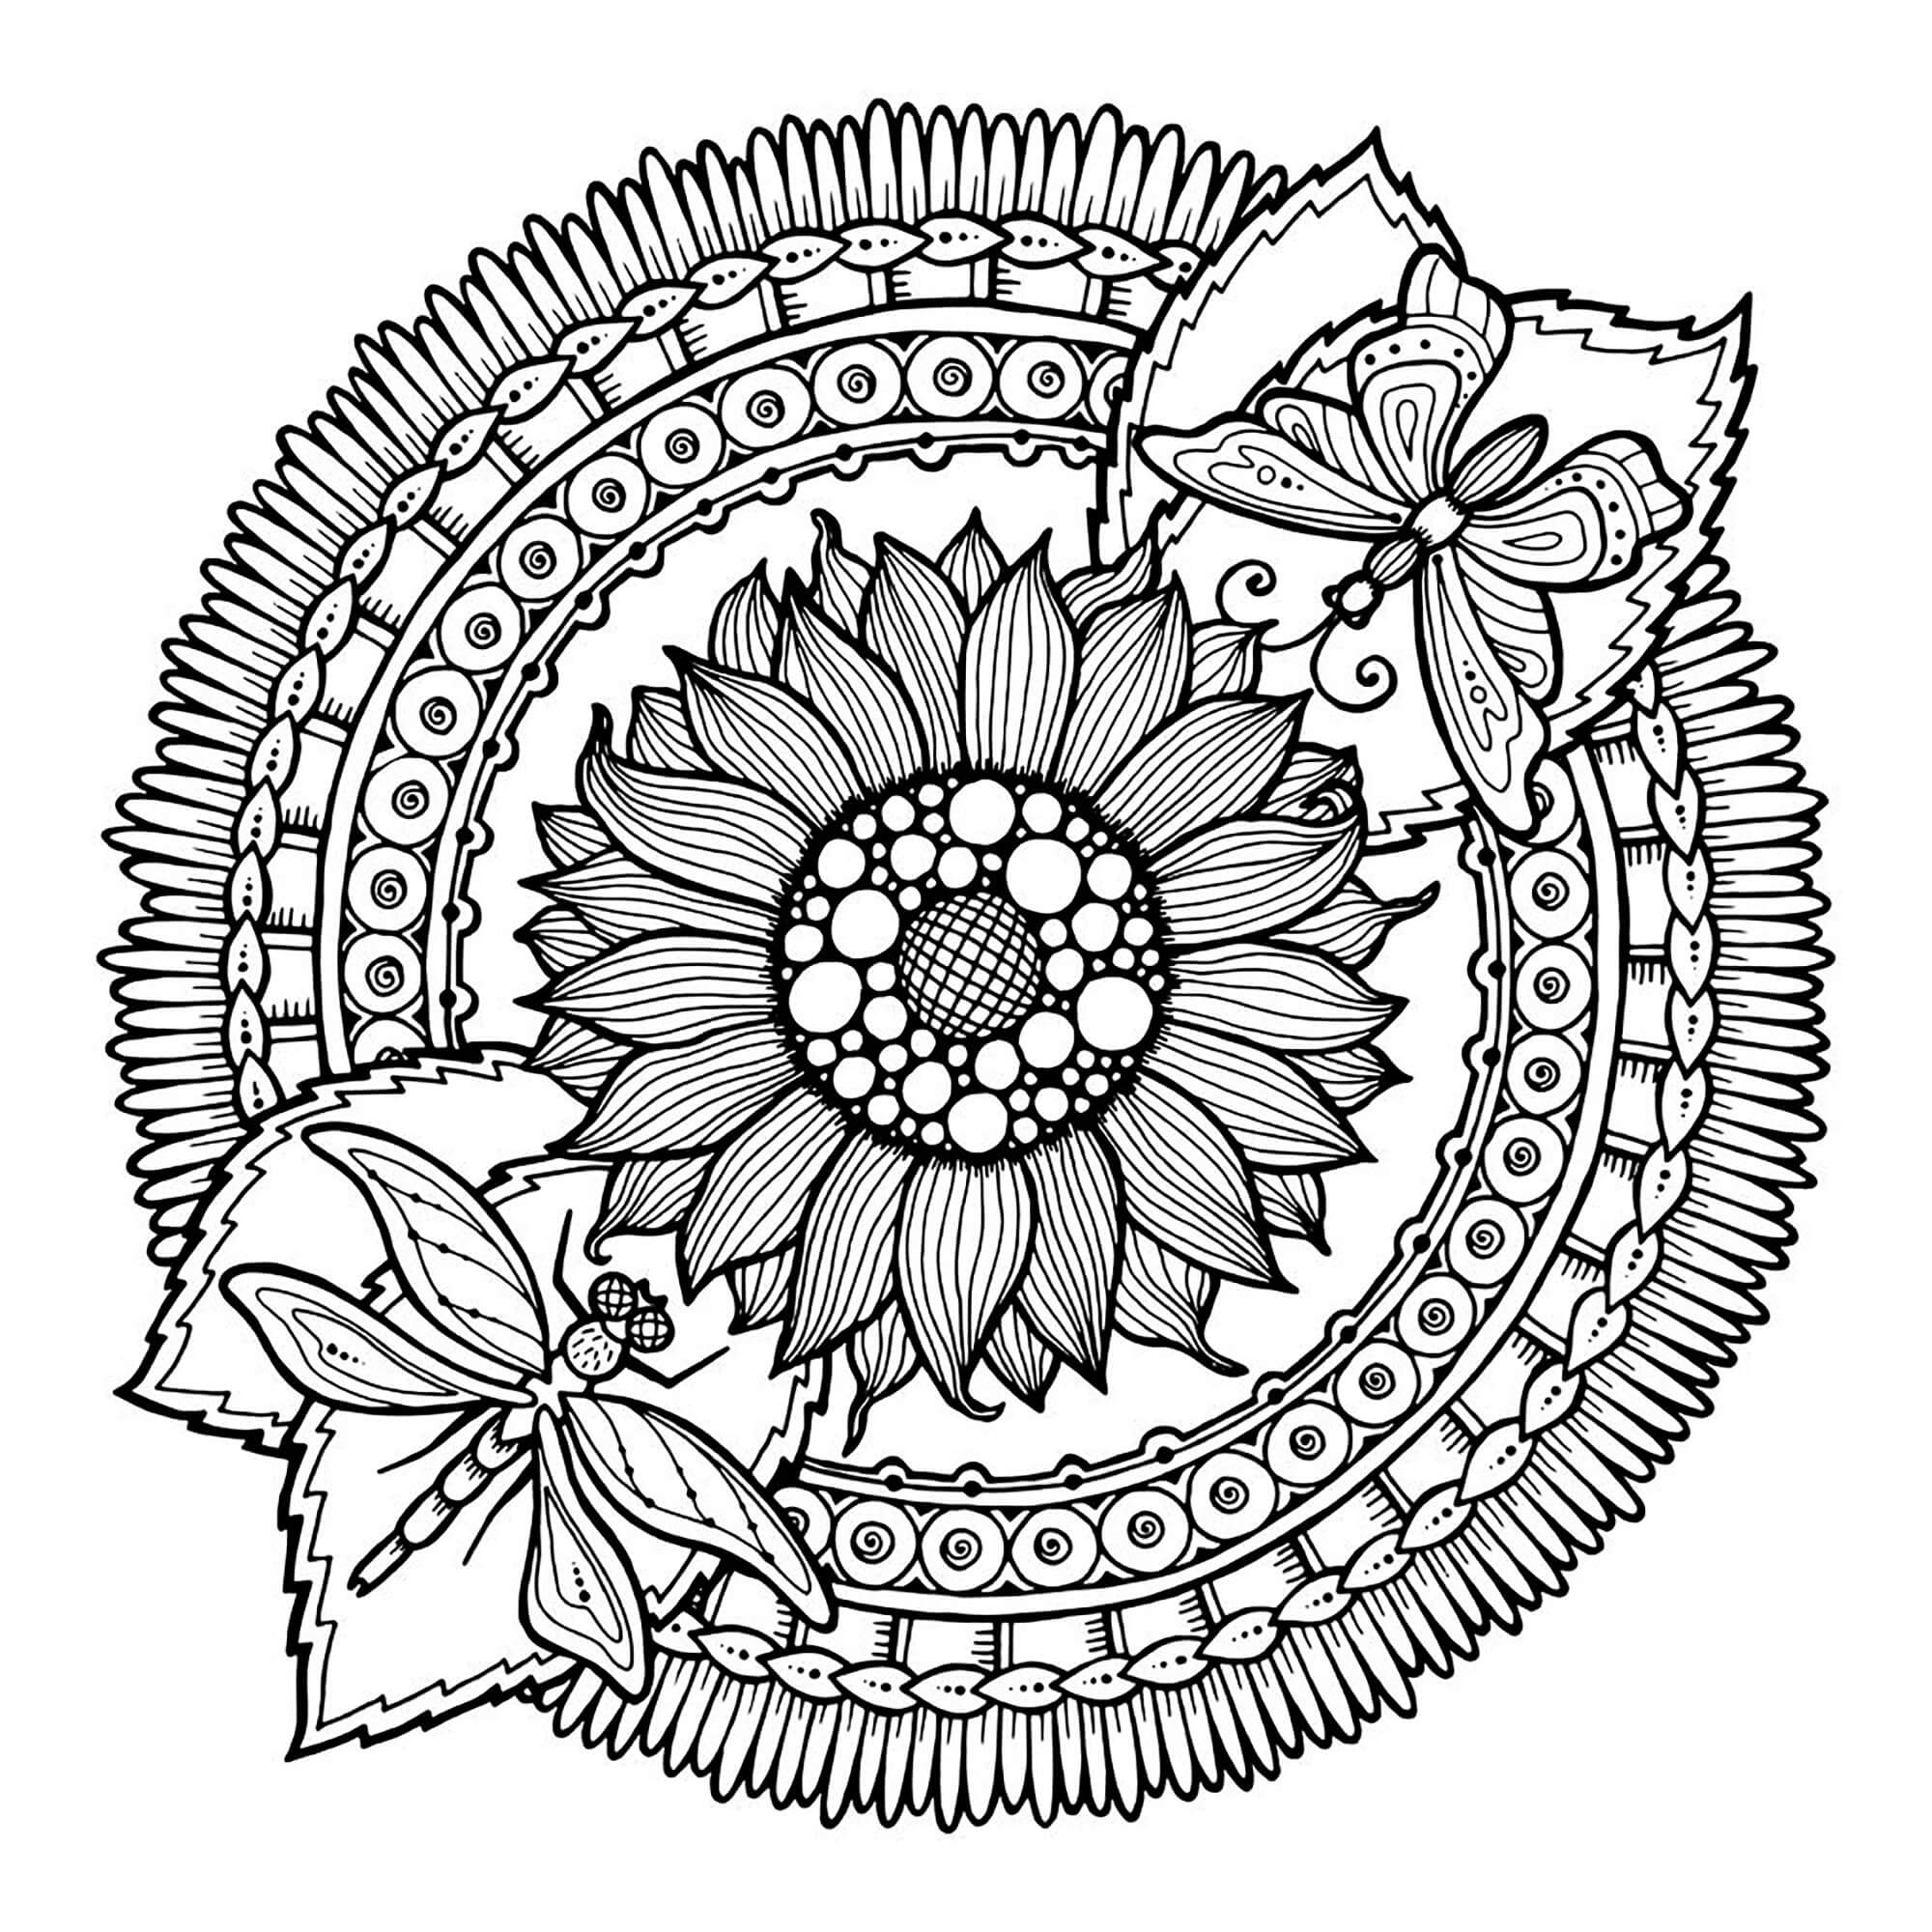 Mandala Two Butterflies And A Sunflower Coloring Page Mandalas